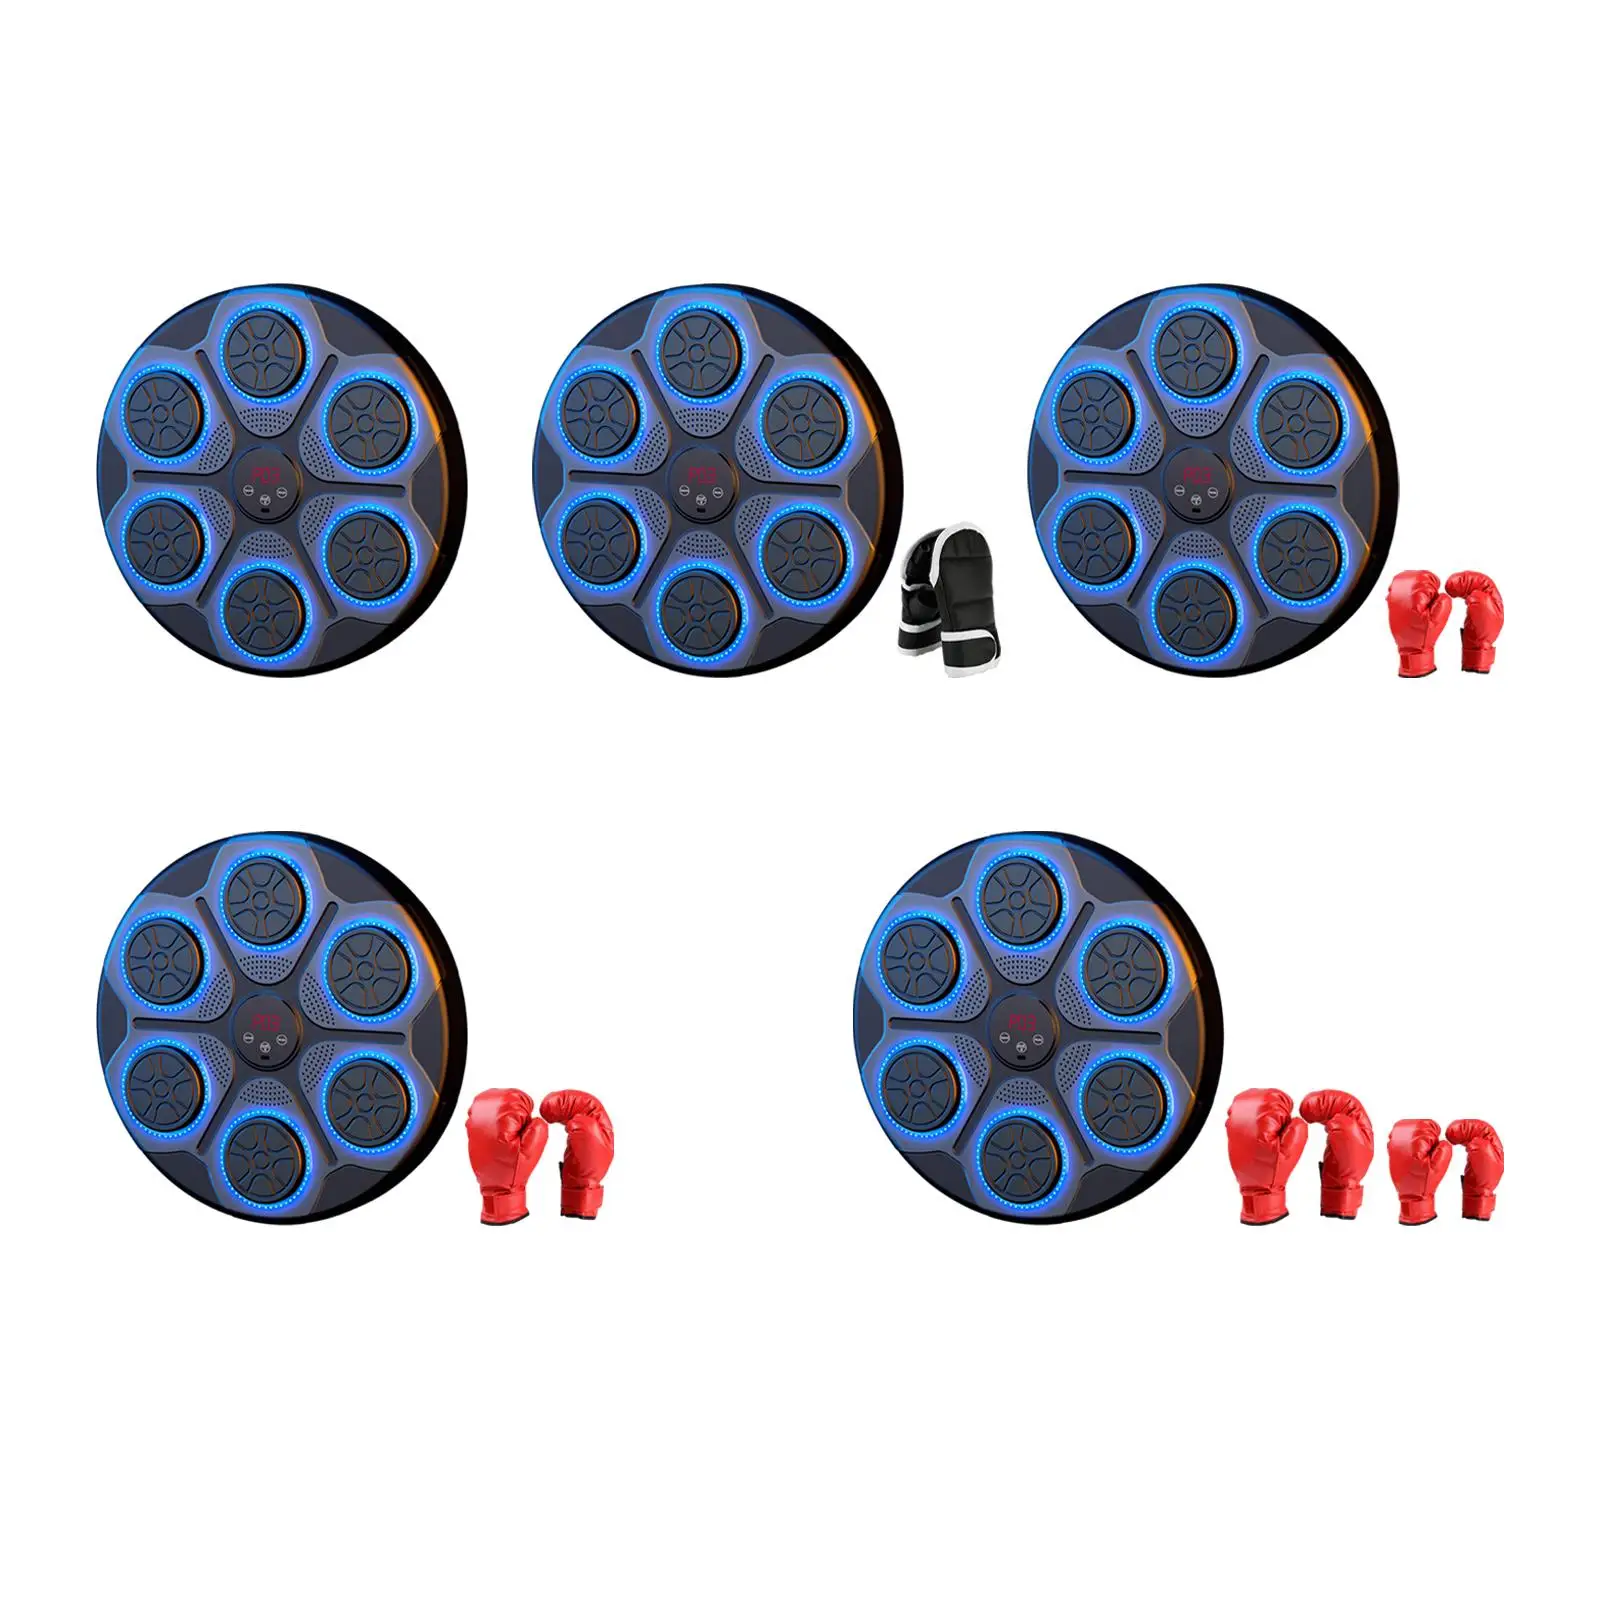 Music Boxing Machine Wall Target Reaction Target for Fitness Exercise Indoor